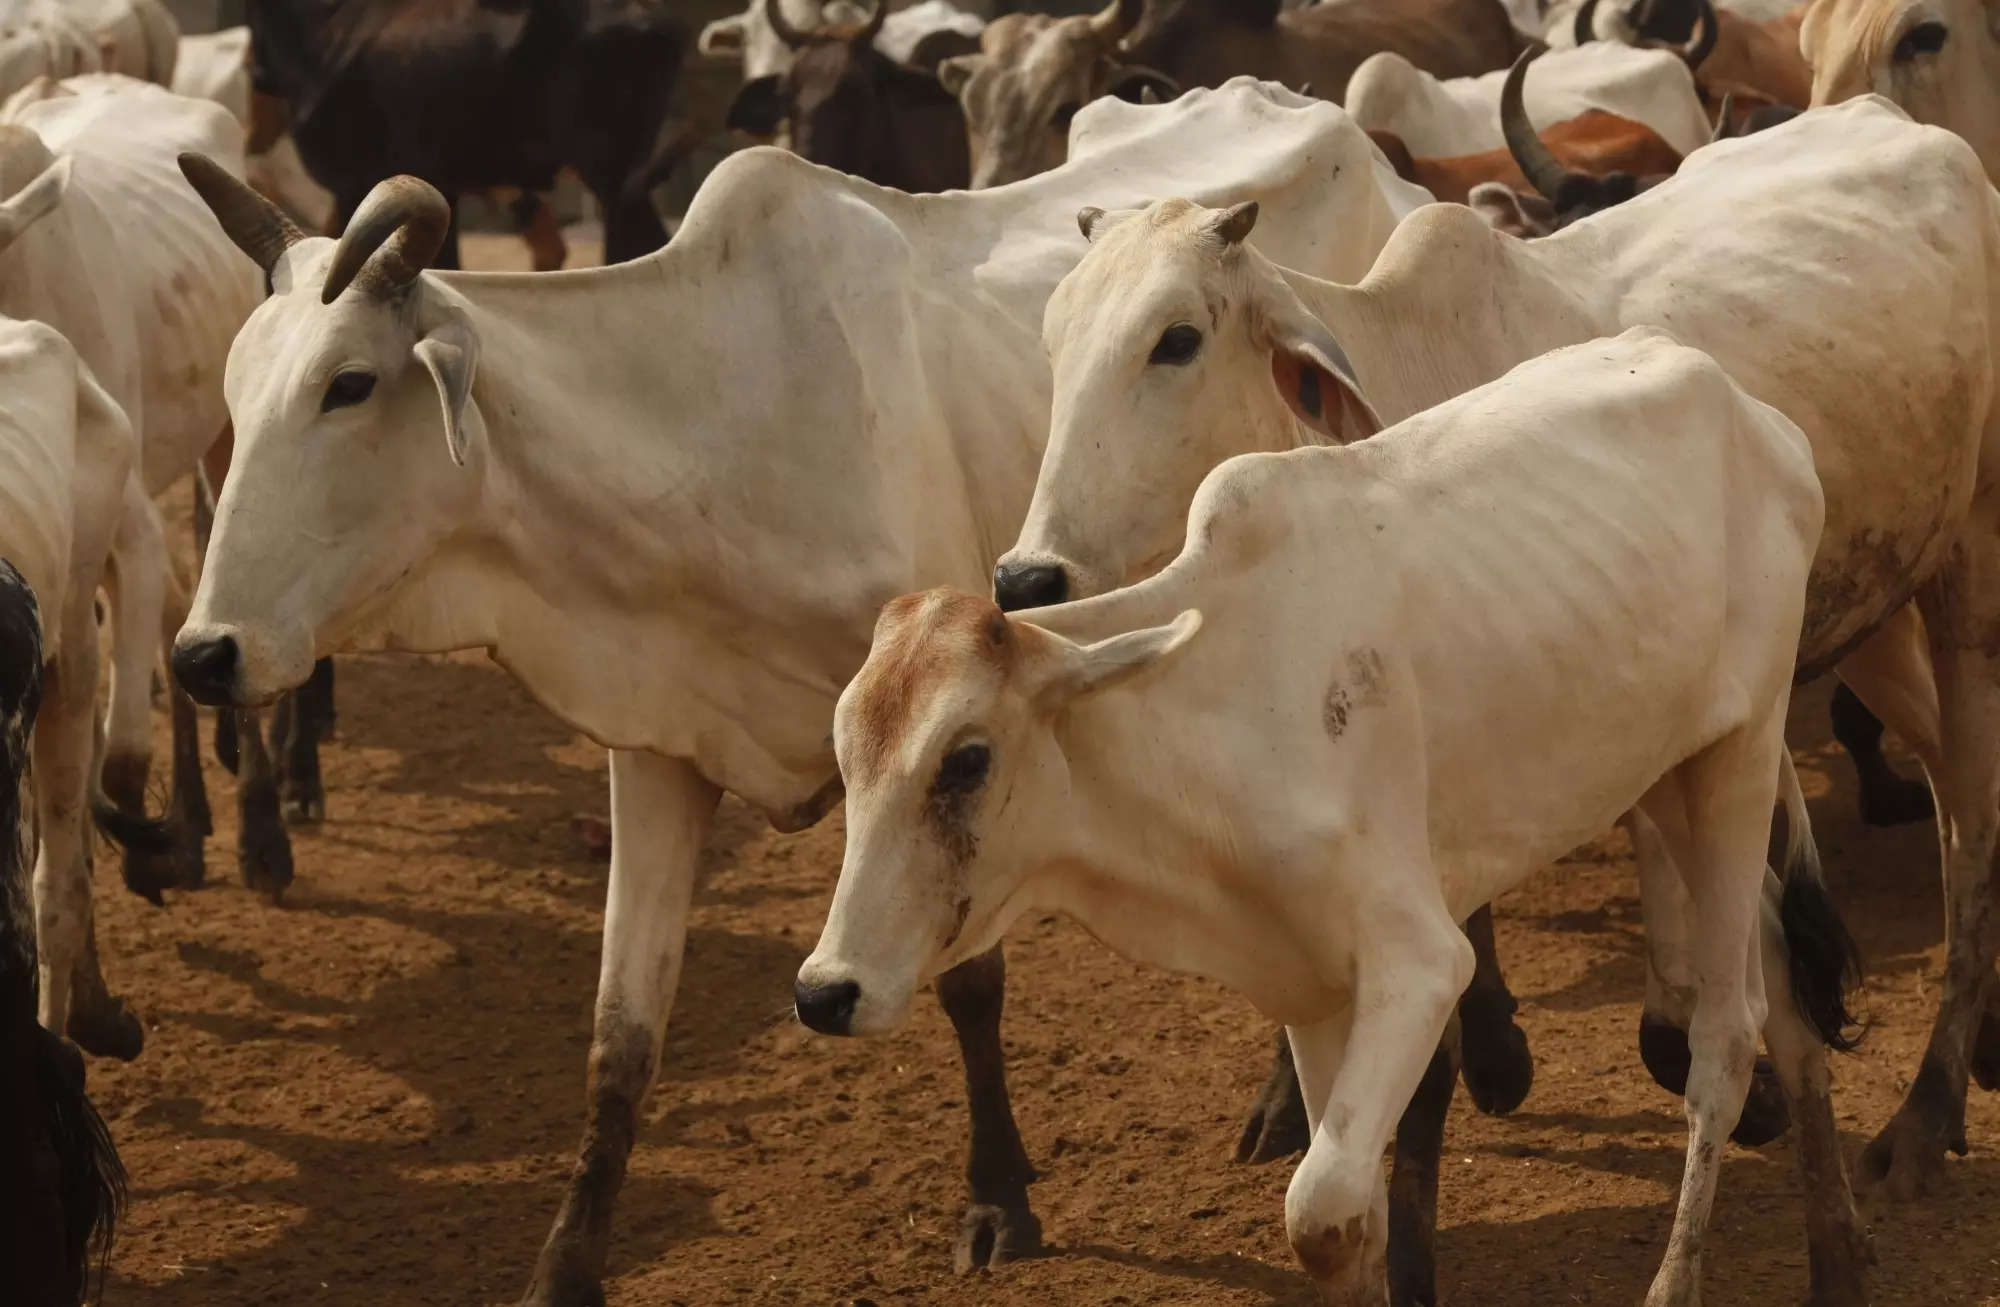 ​Cow found slaughtered in Delhi